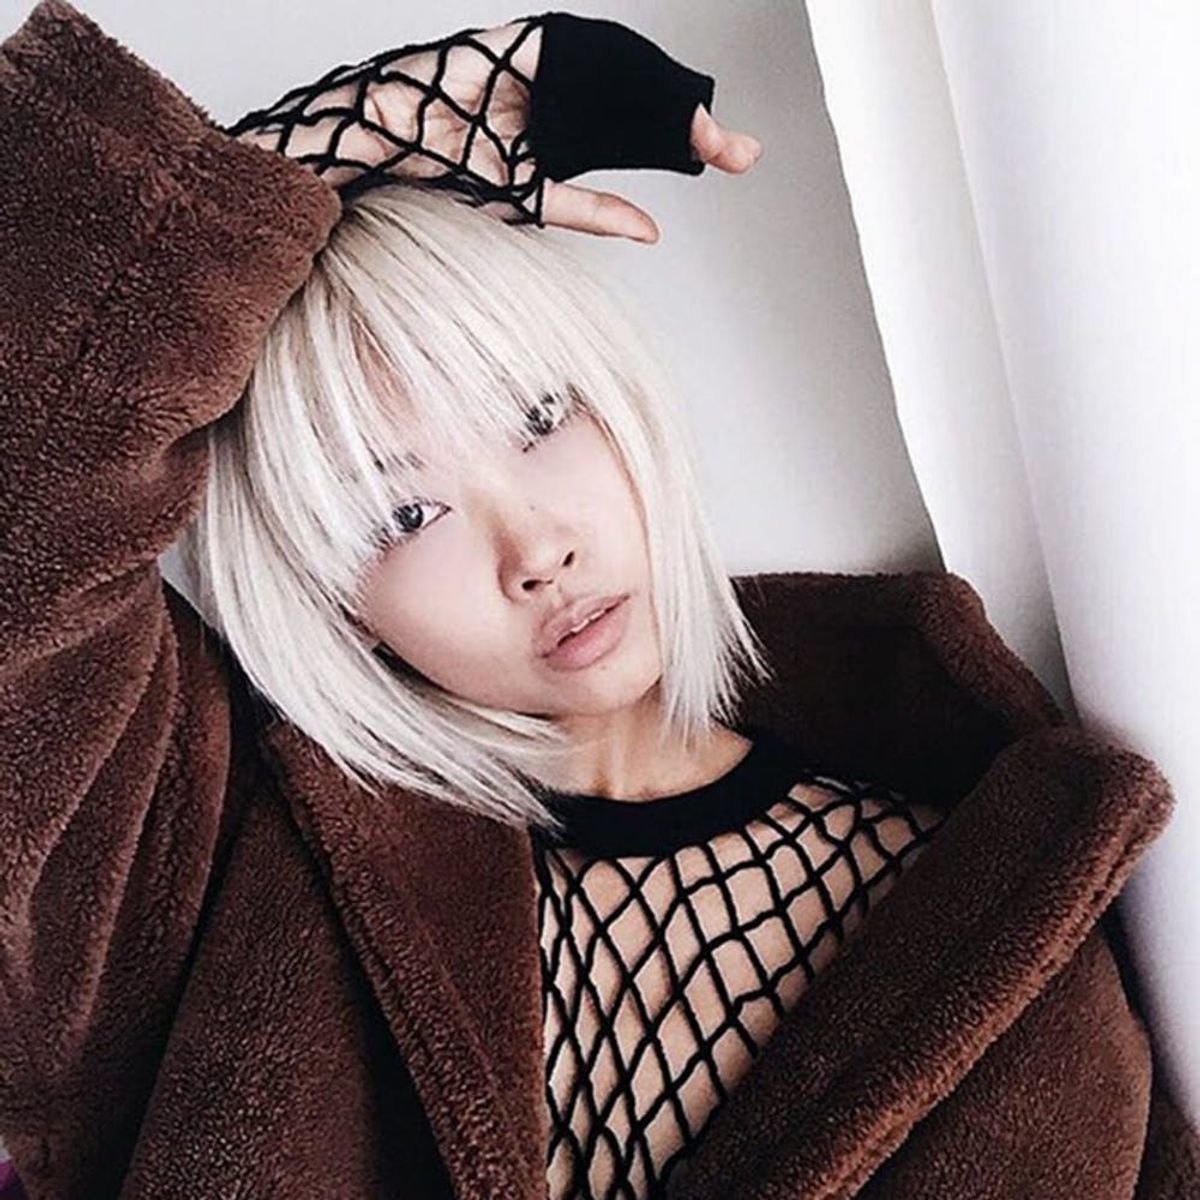 This Is How You Rock Fishnets, According to Instagram